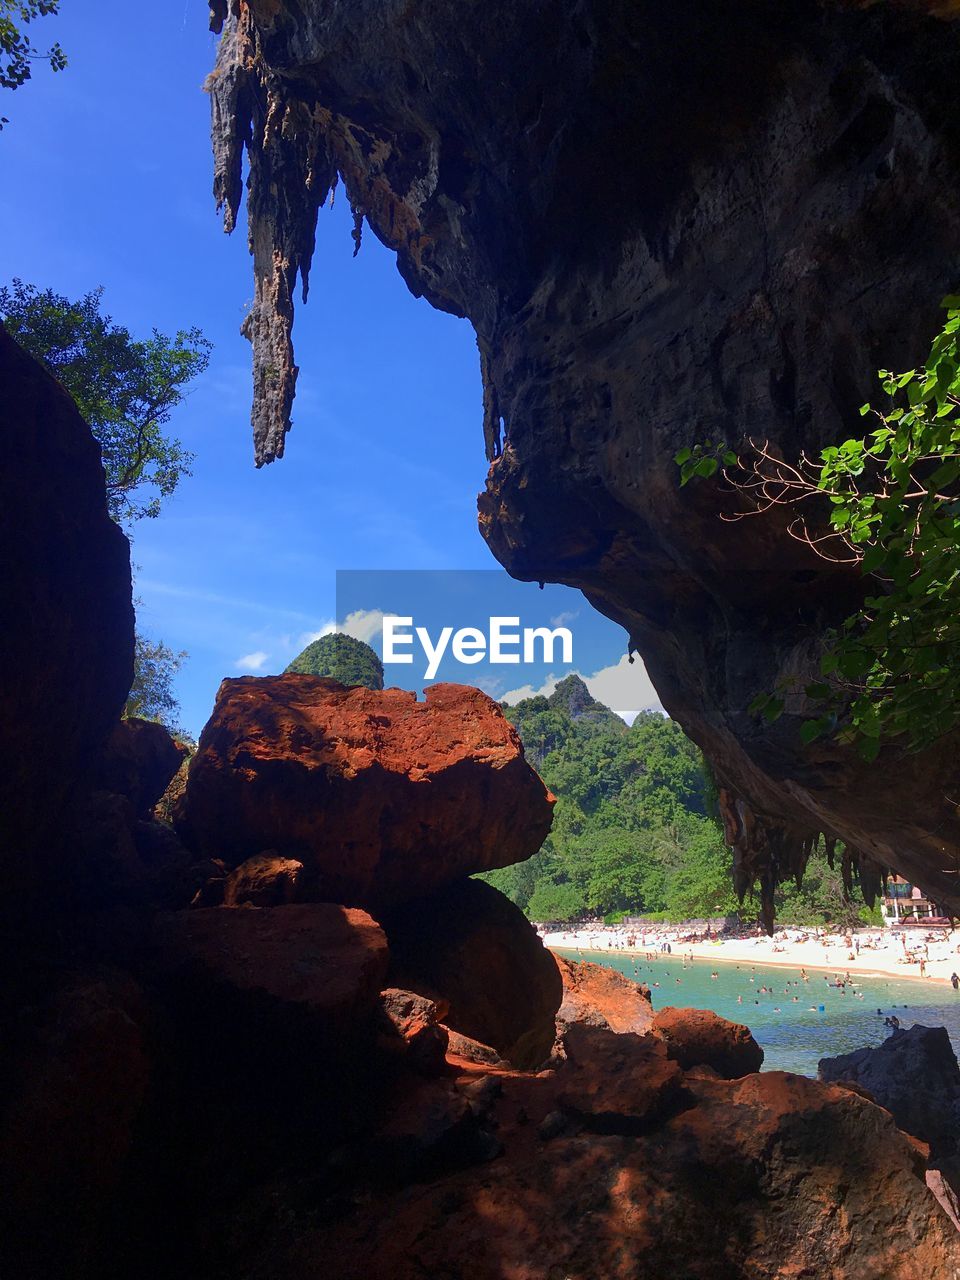 SCENIC VIEW OF ROCK FORMATIONS IN CAVE